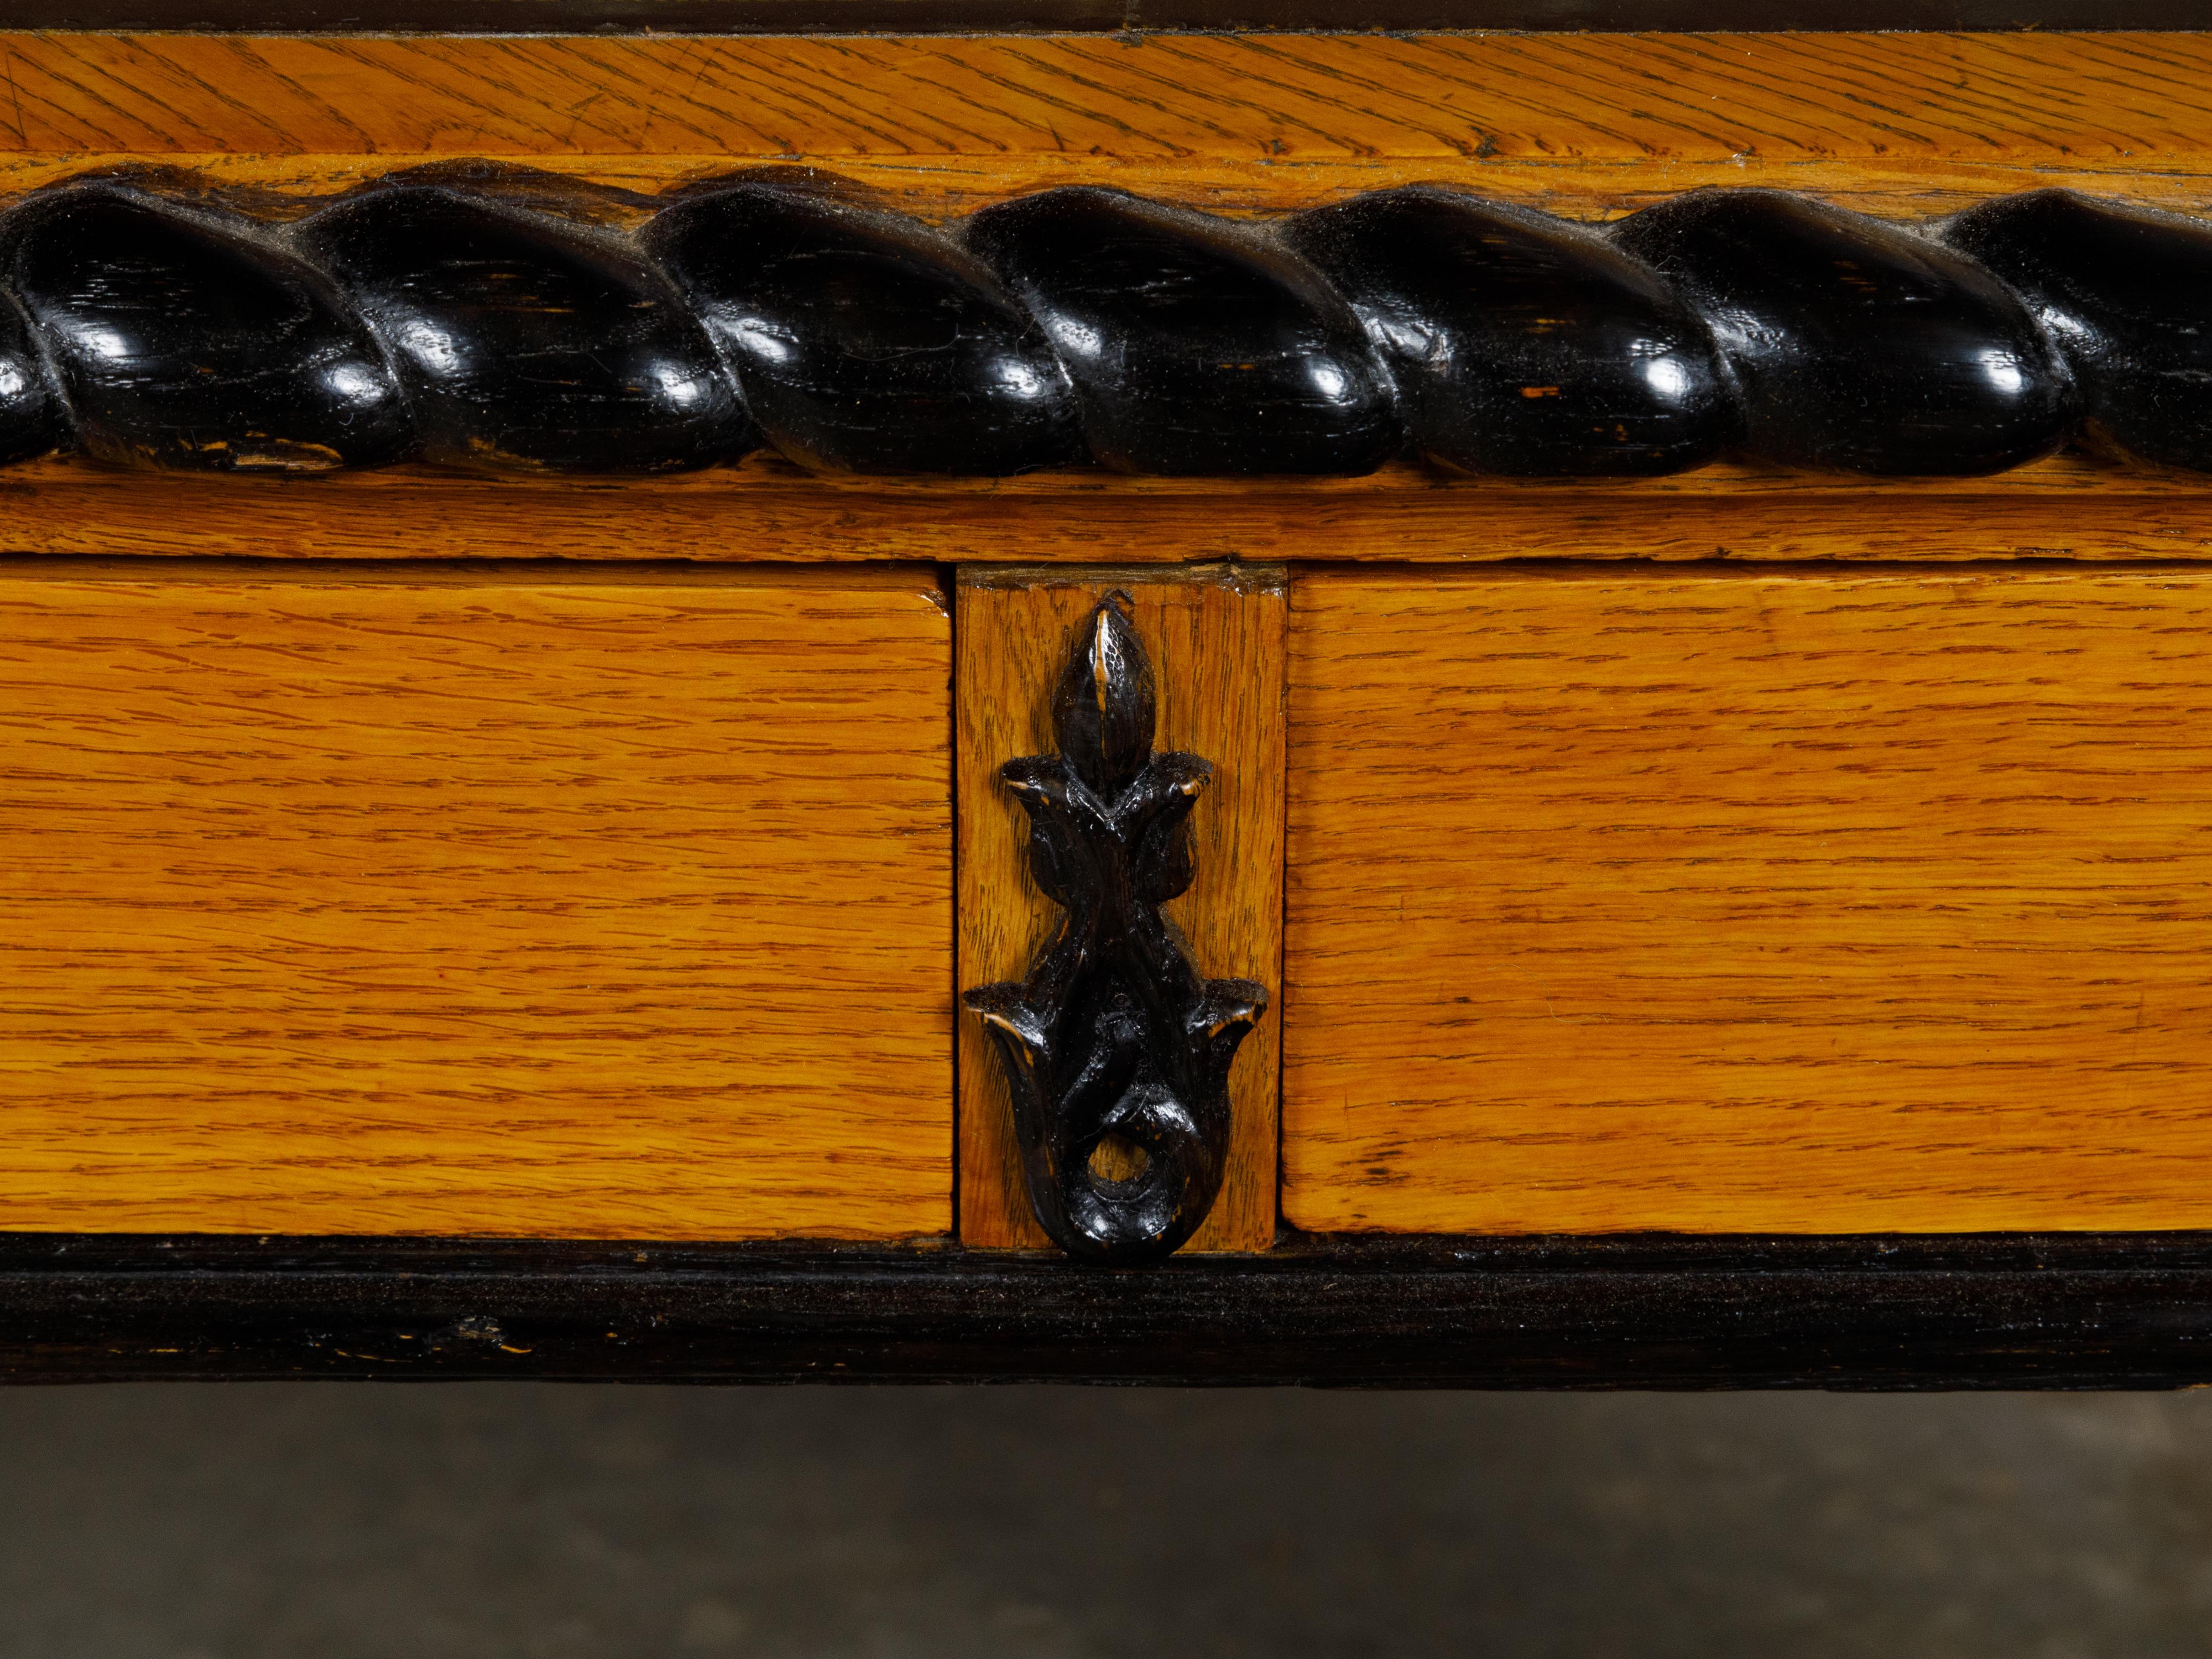 English 19th Century Oak Desk with Ebonized Accents and Gilded Greek Key Frieze For Sale 5